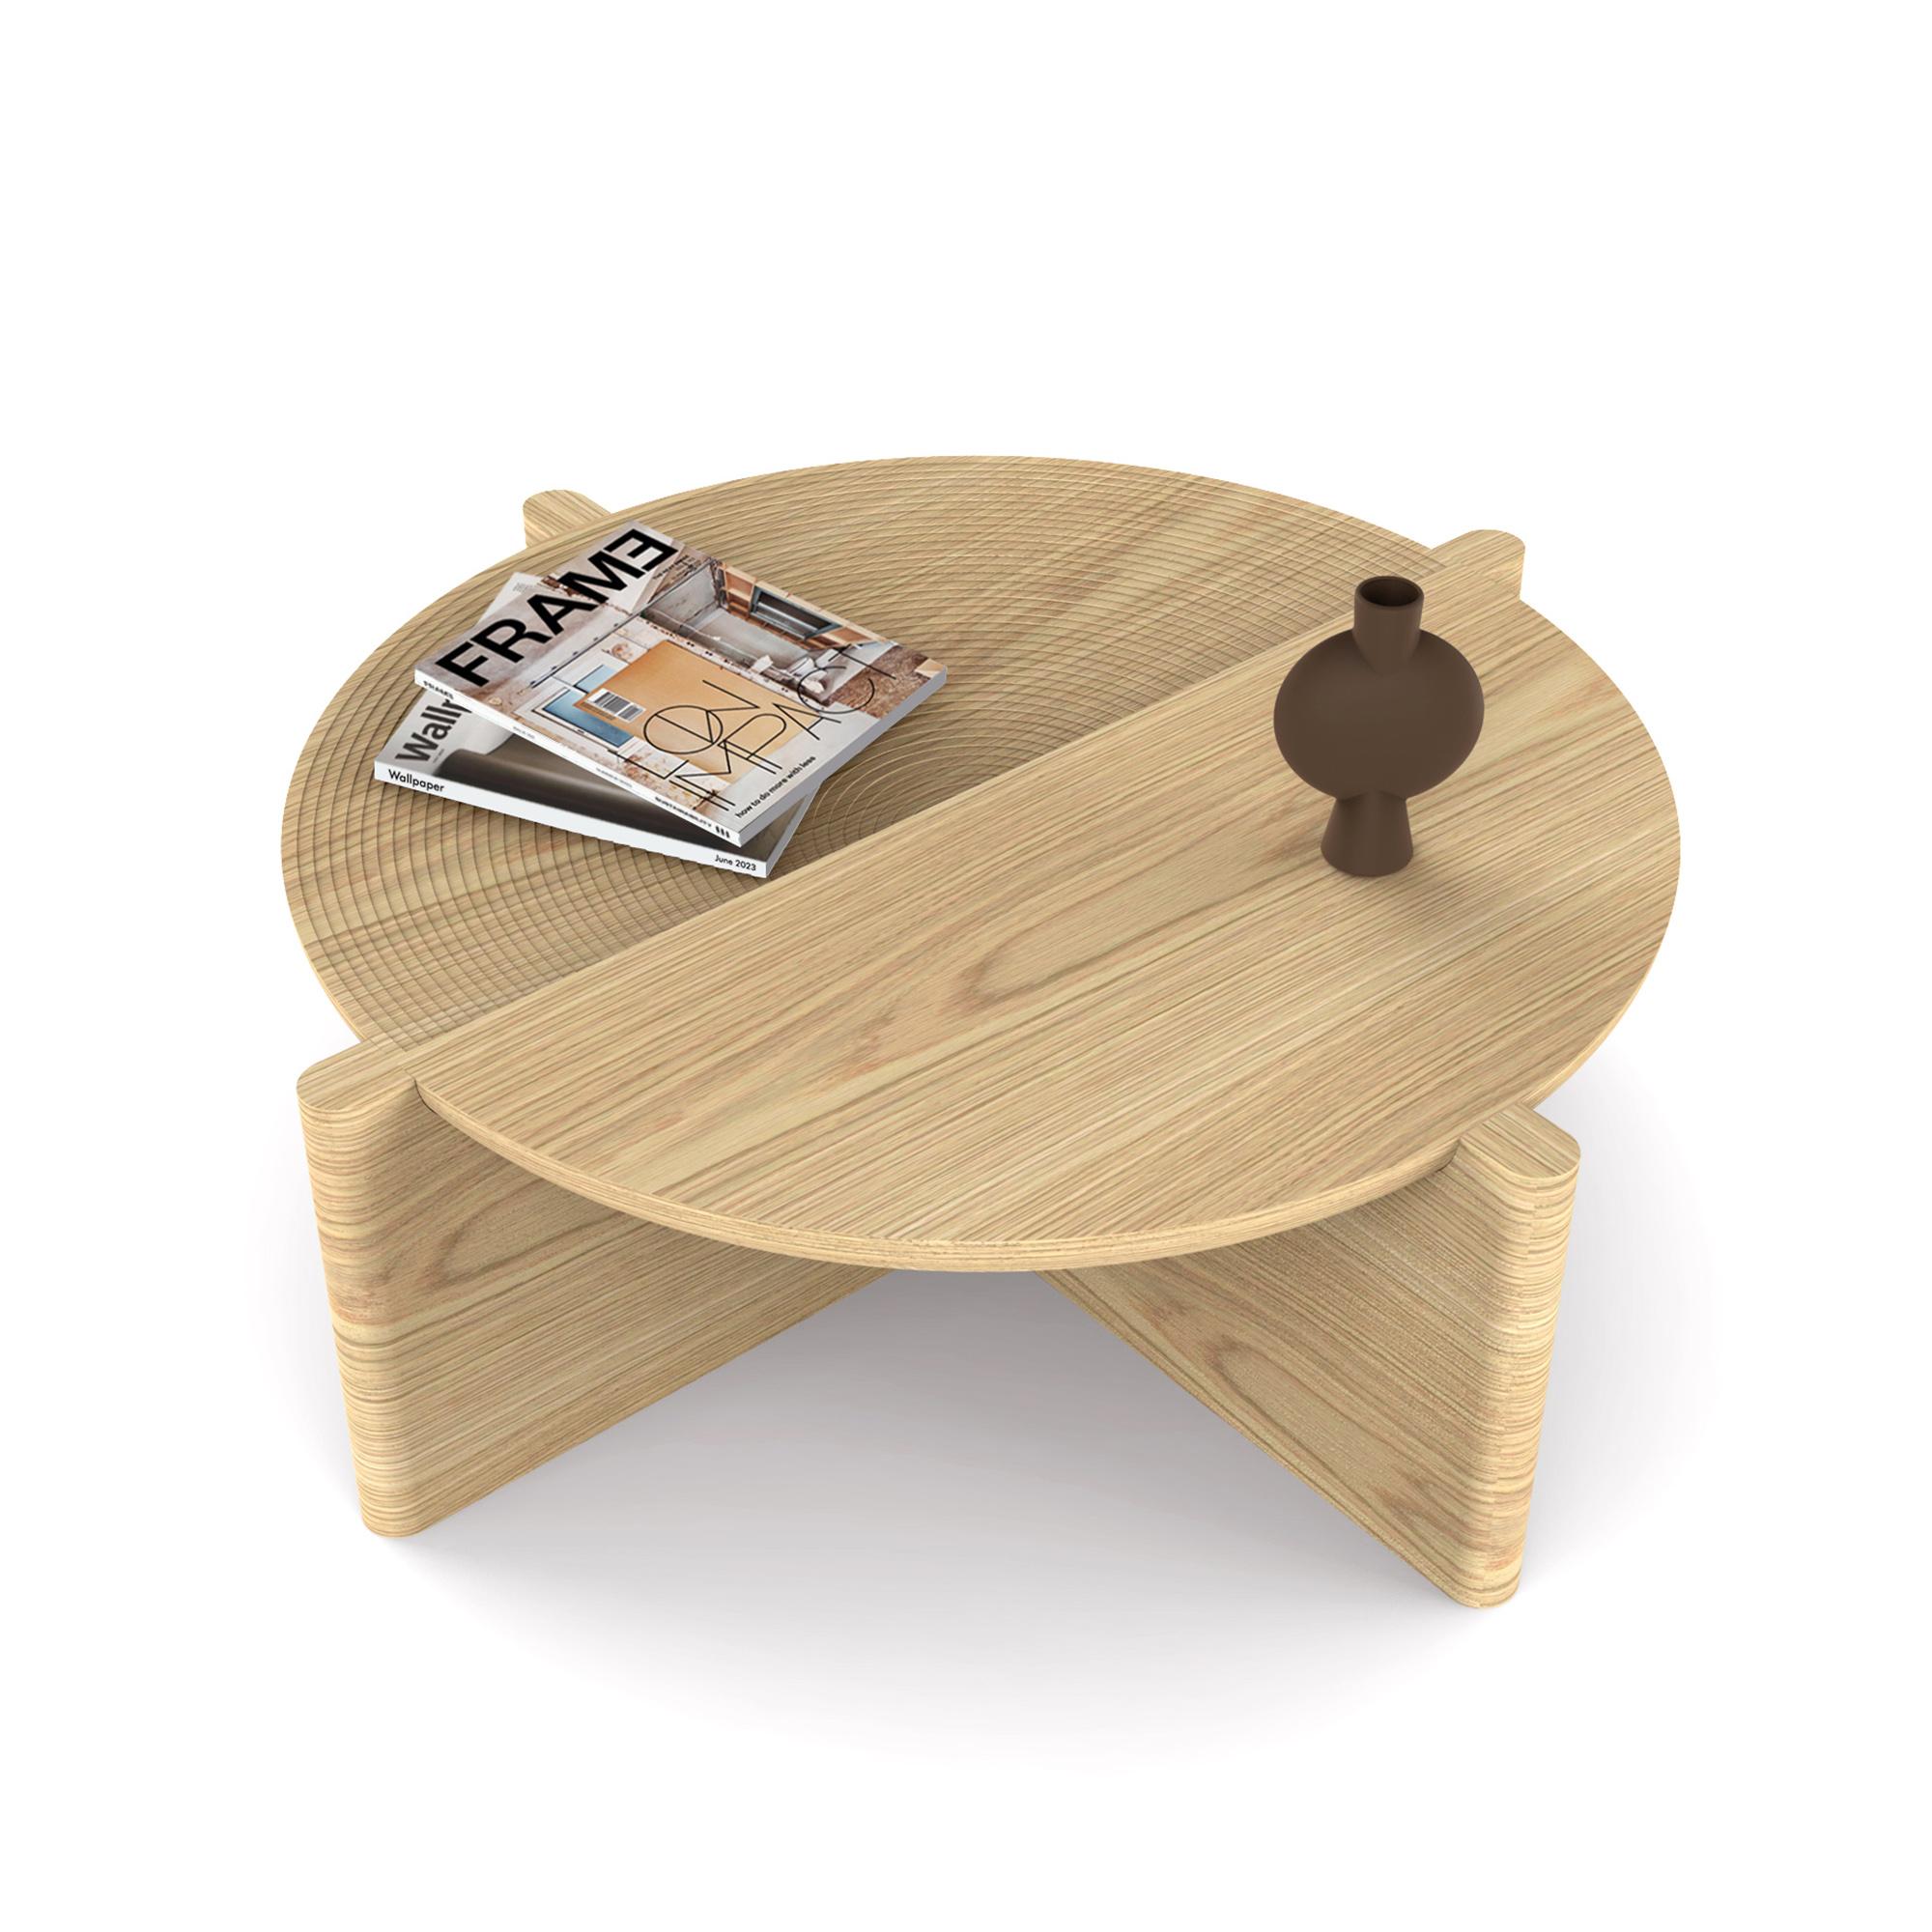 Arkhe Coffee Table in Solid Oak, Modern Sculptural Round by Fulden Topaloglu In New Condition For Sale In Istanbul, TR